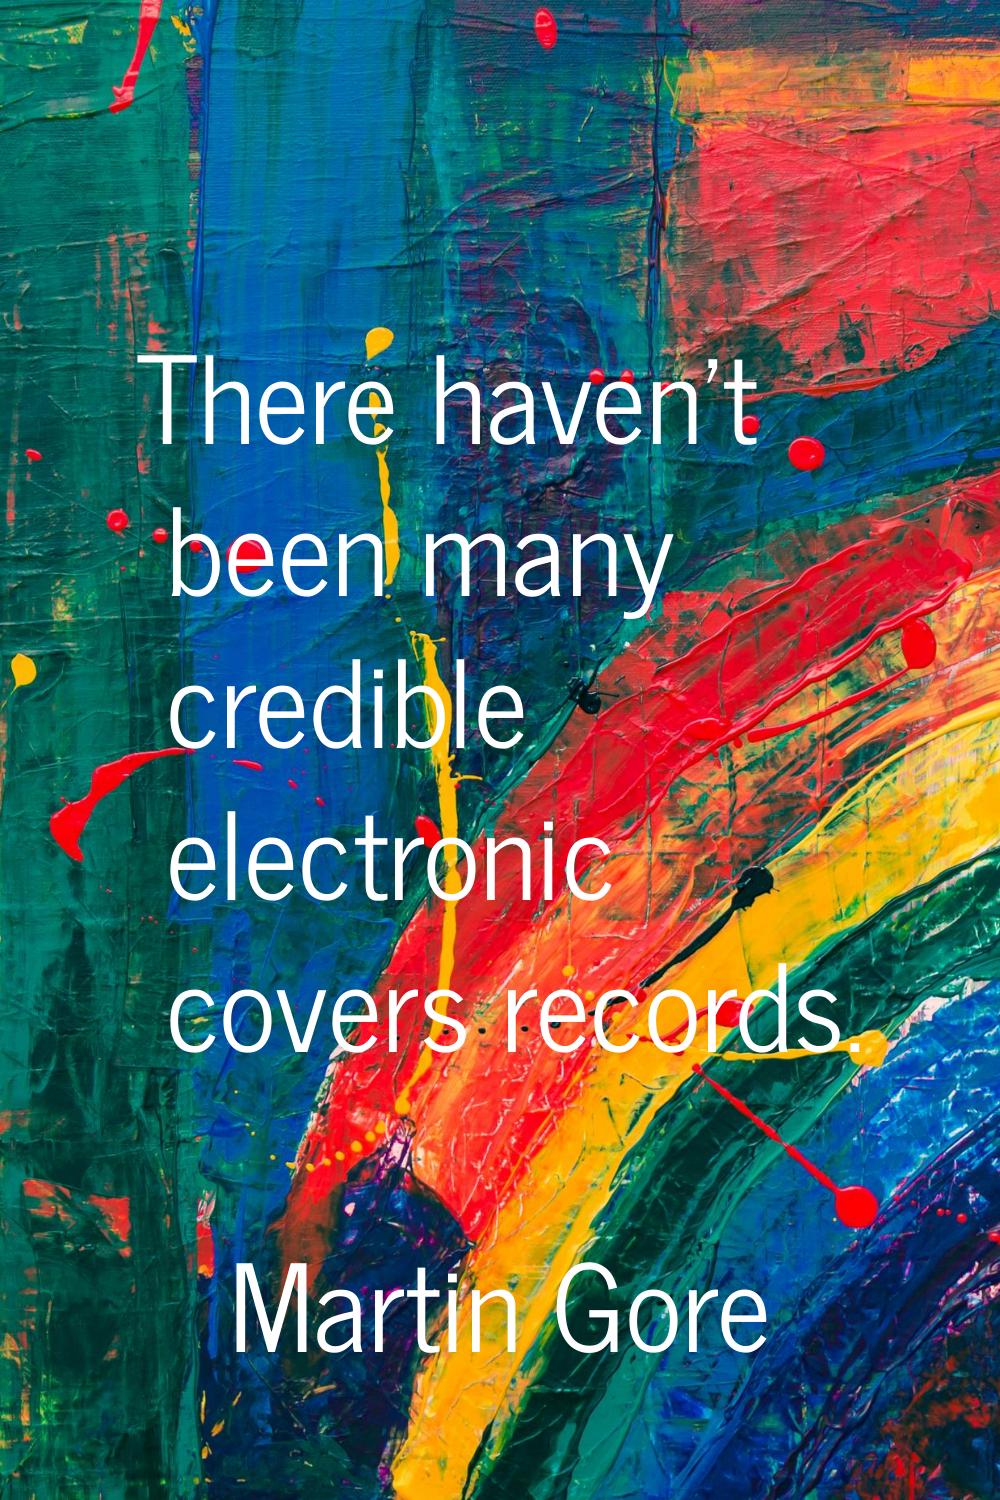 There haven't been many credible electronic covers records.